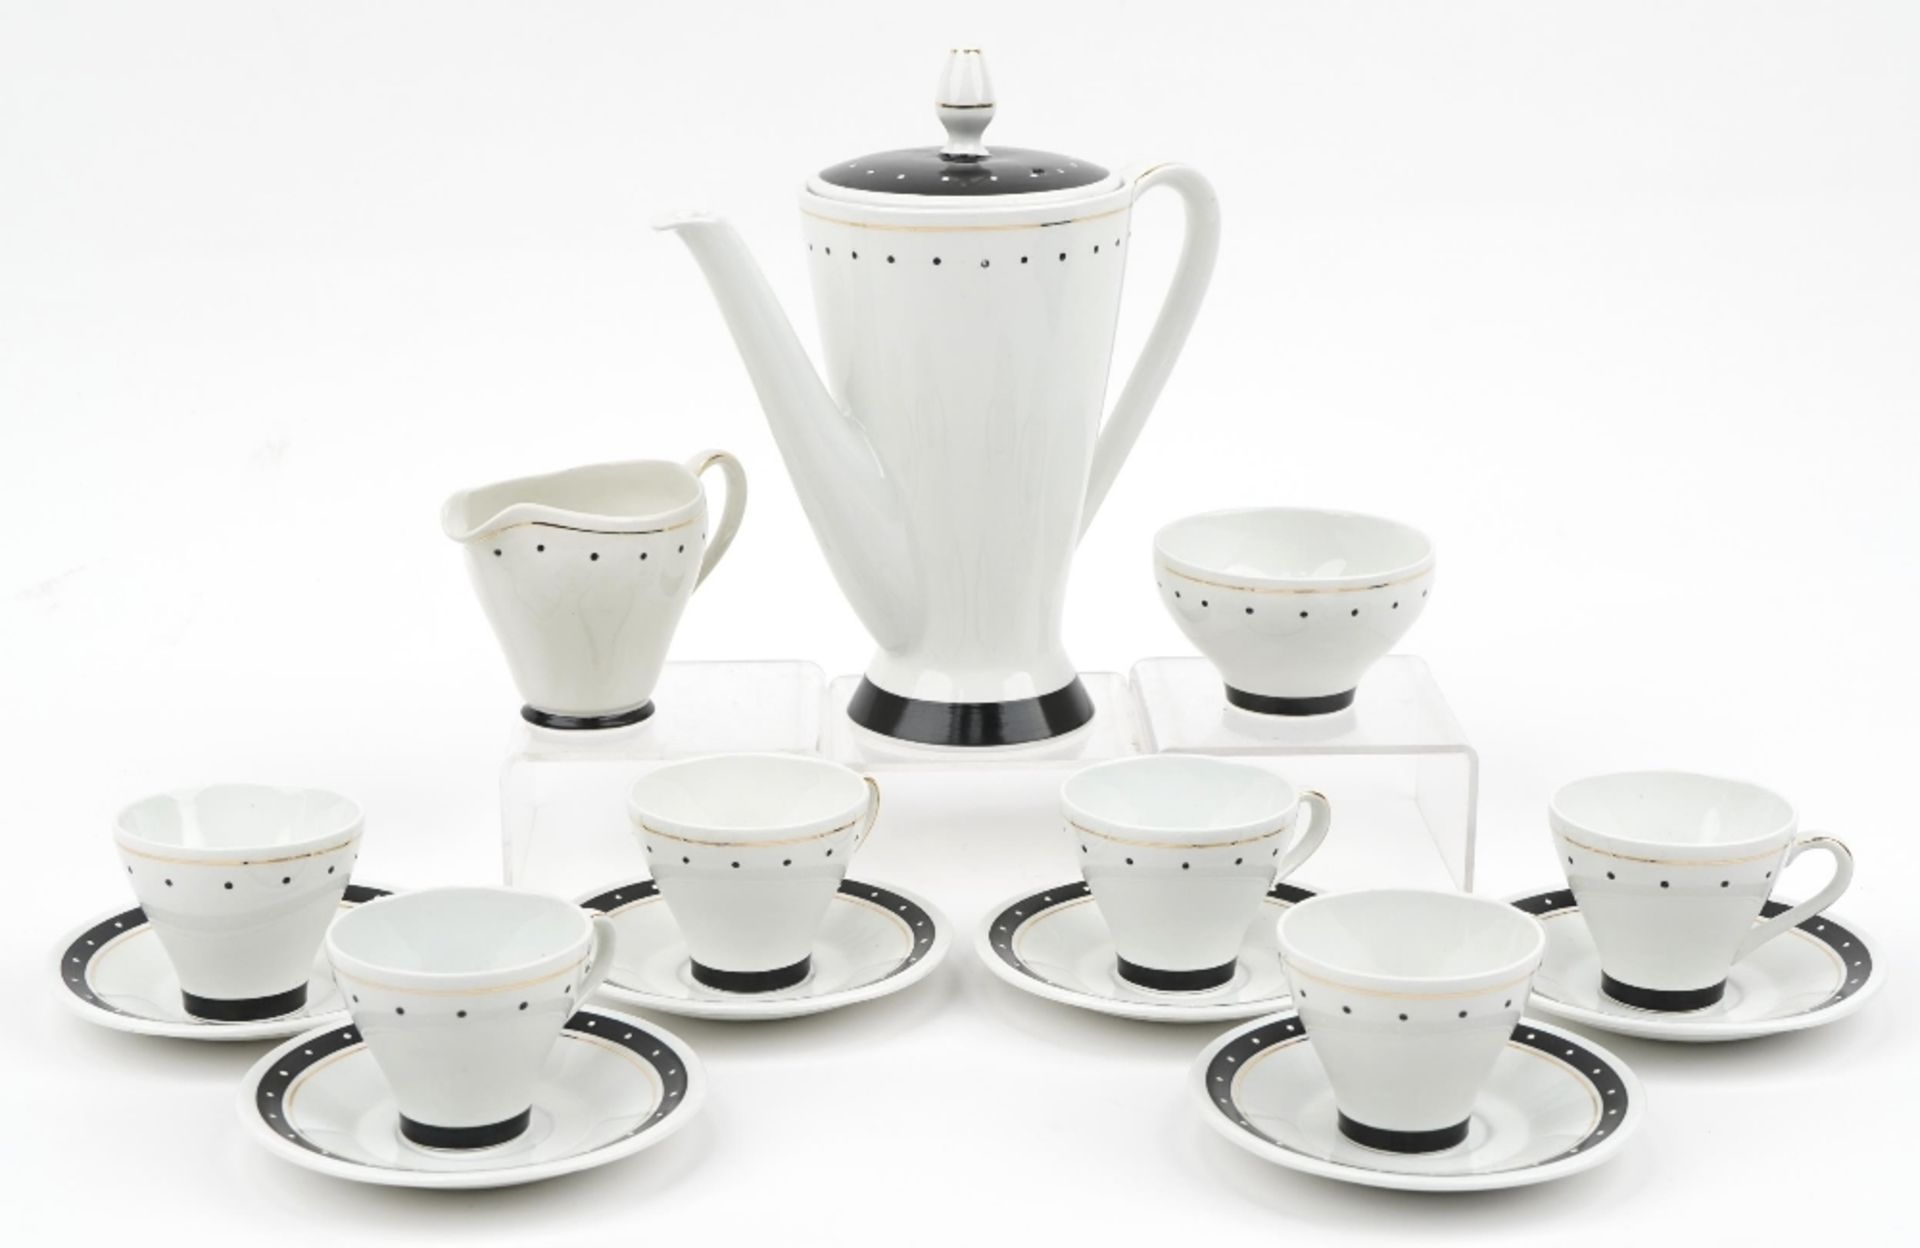 Burleigh Ware Art Deco six place coffee service, the coffee pot 23cm high : For further